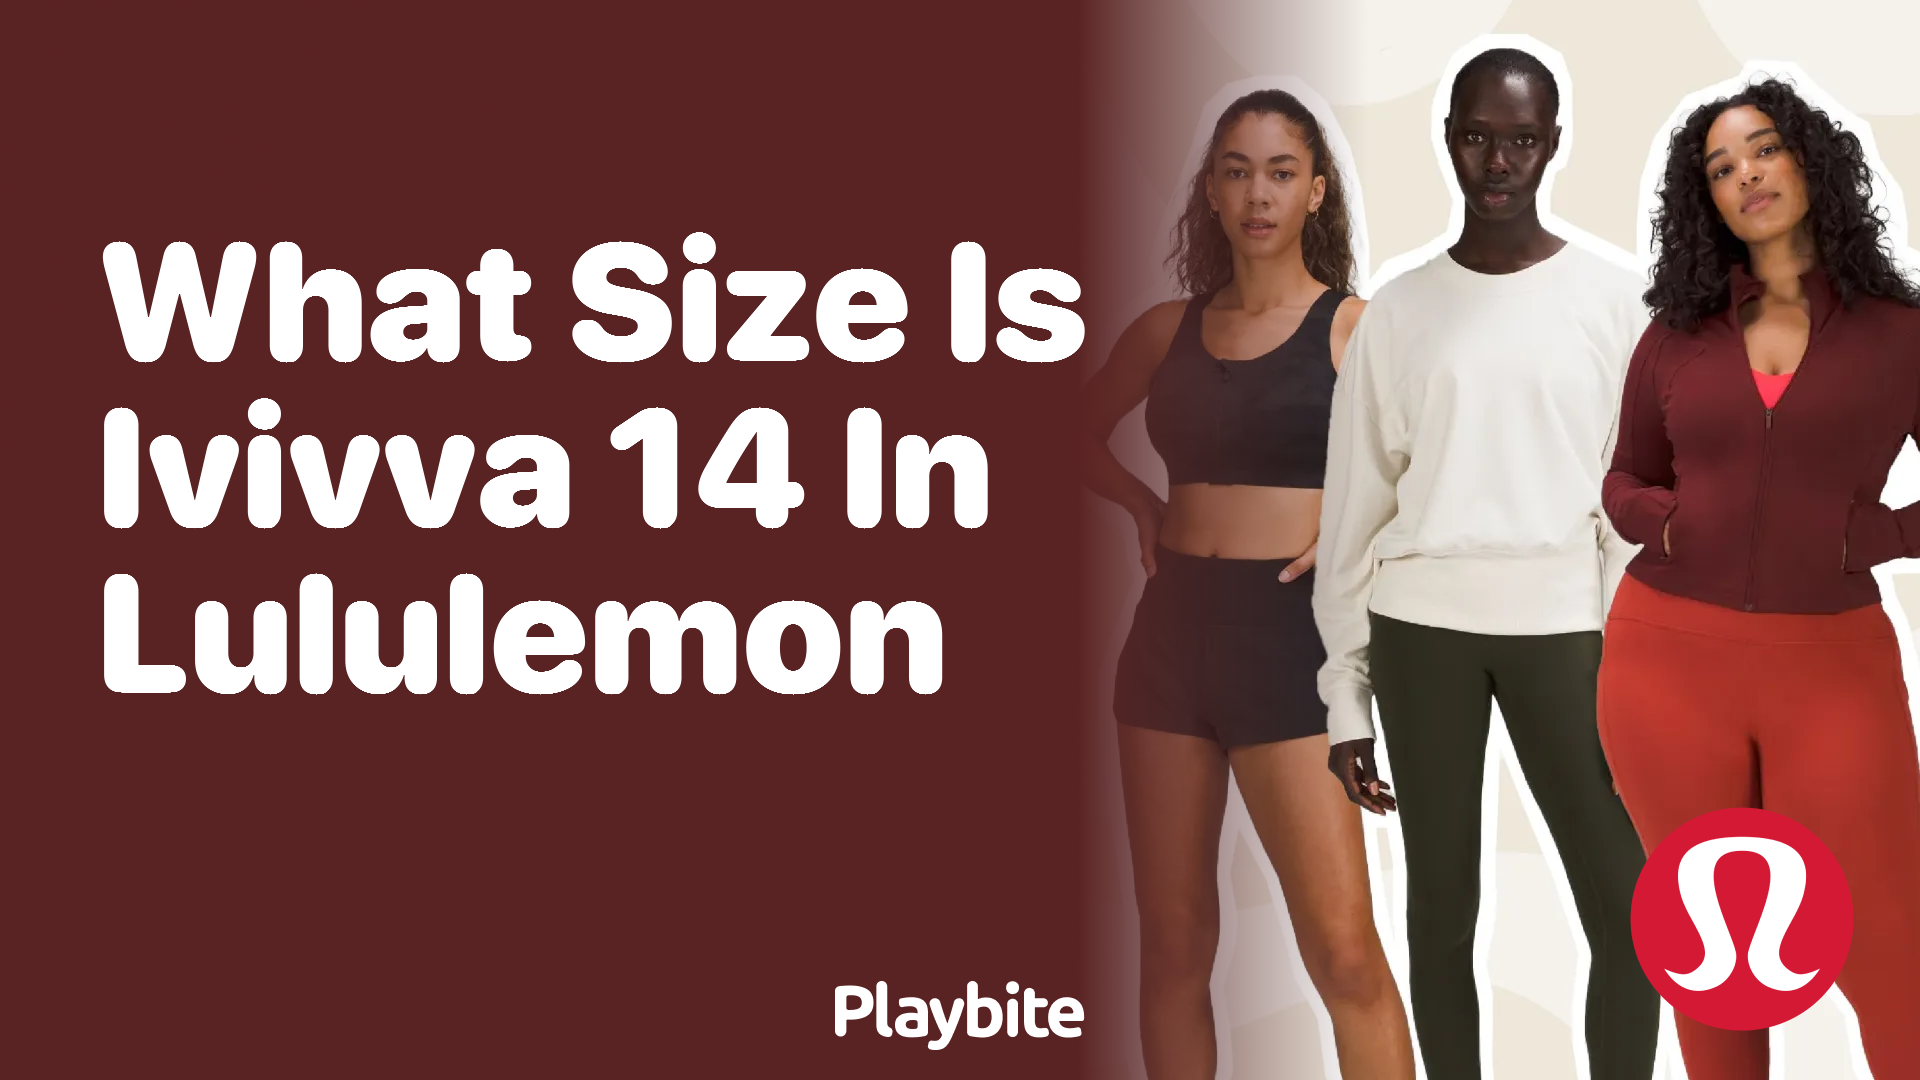 What Size Does Ivivva 14 Translate To in Lululemon? - Playbite